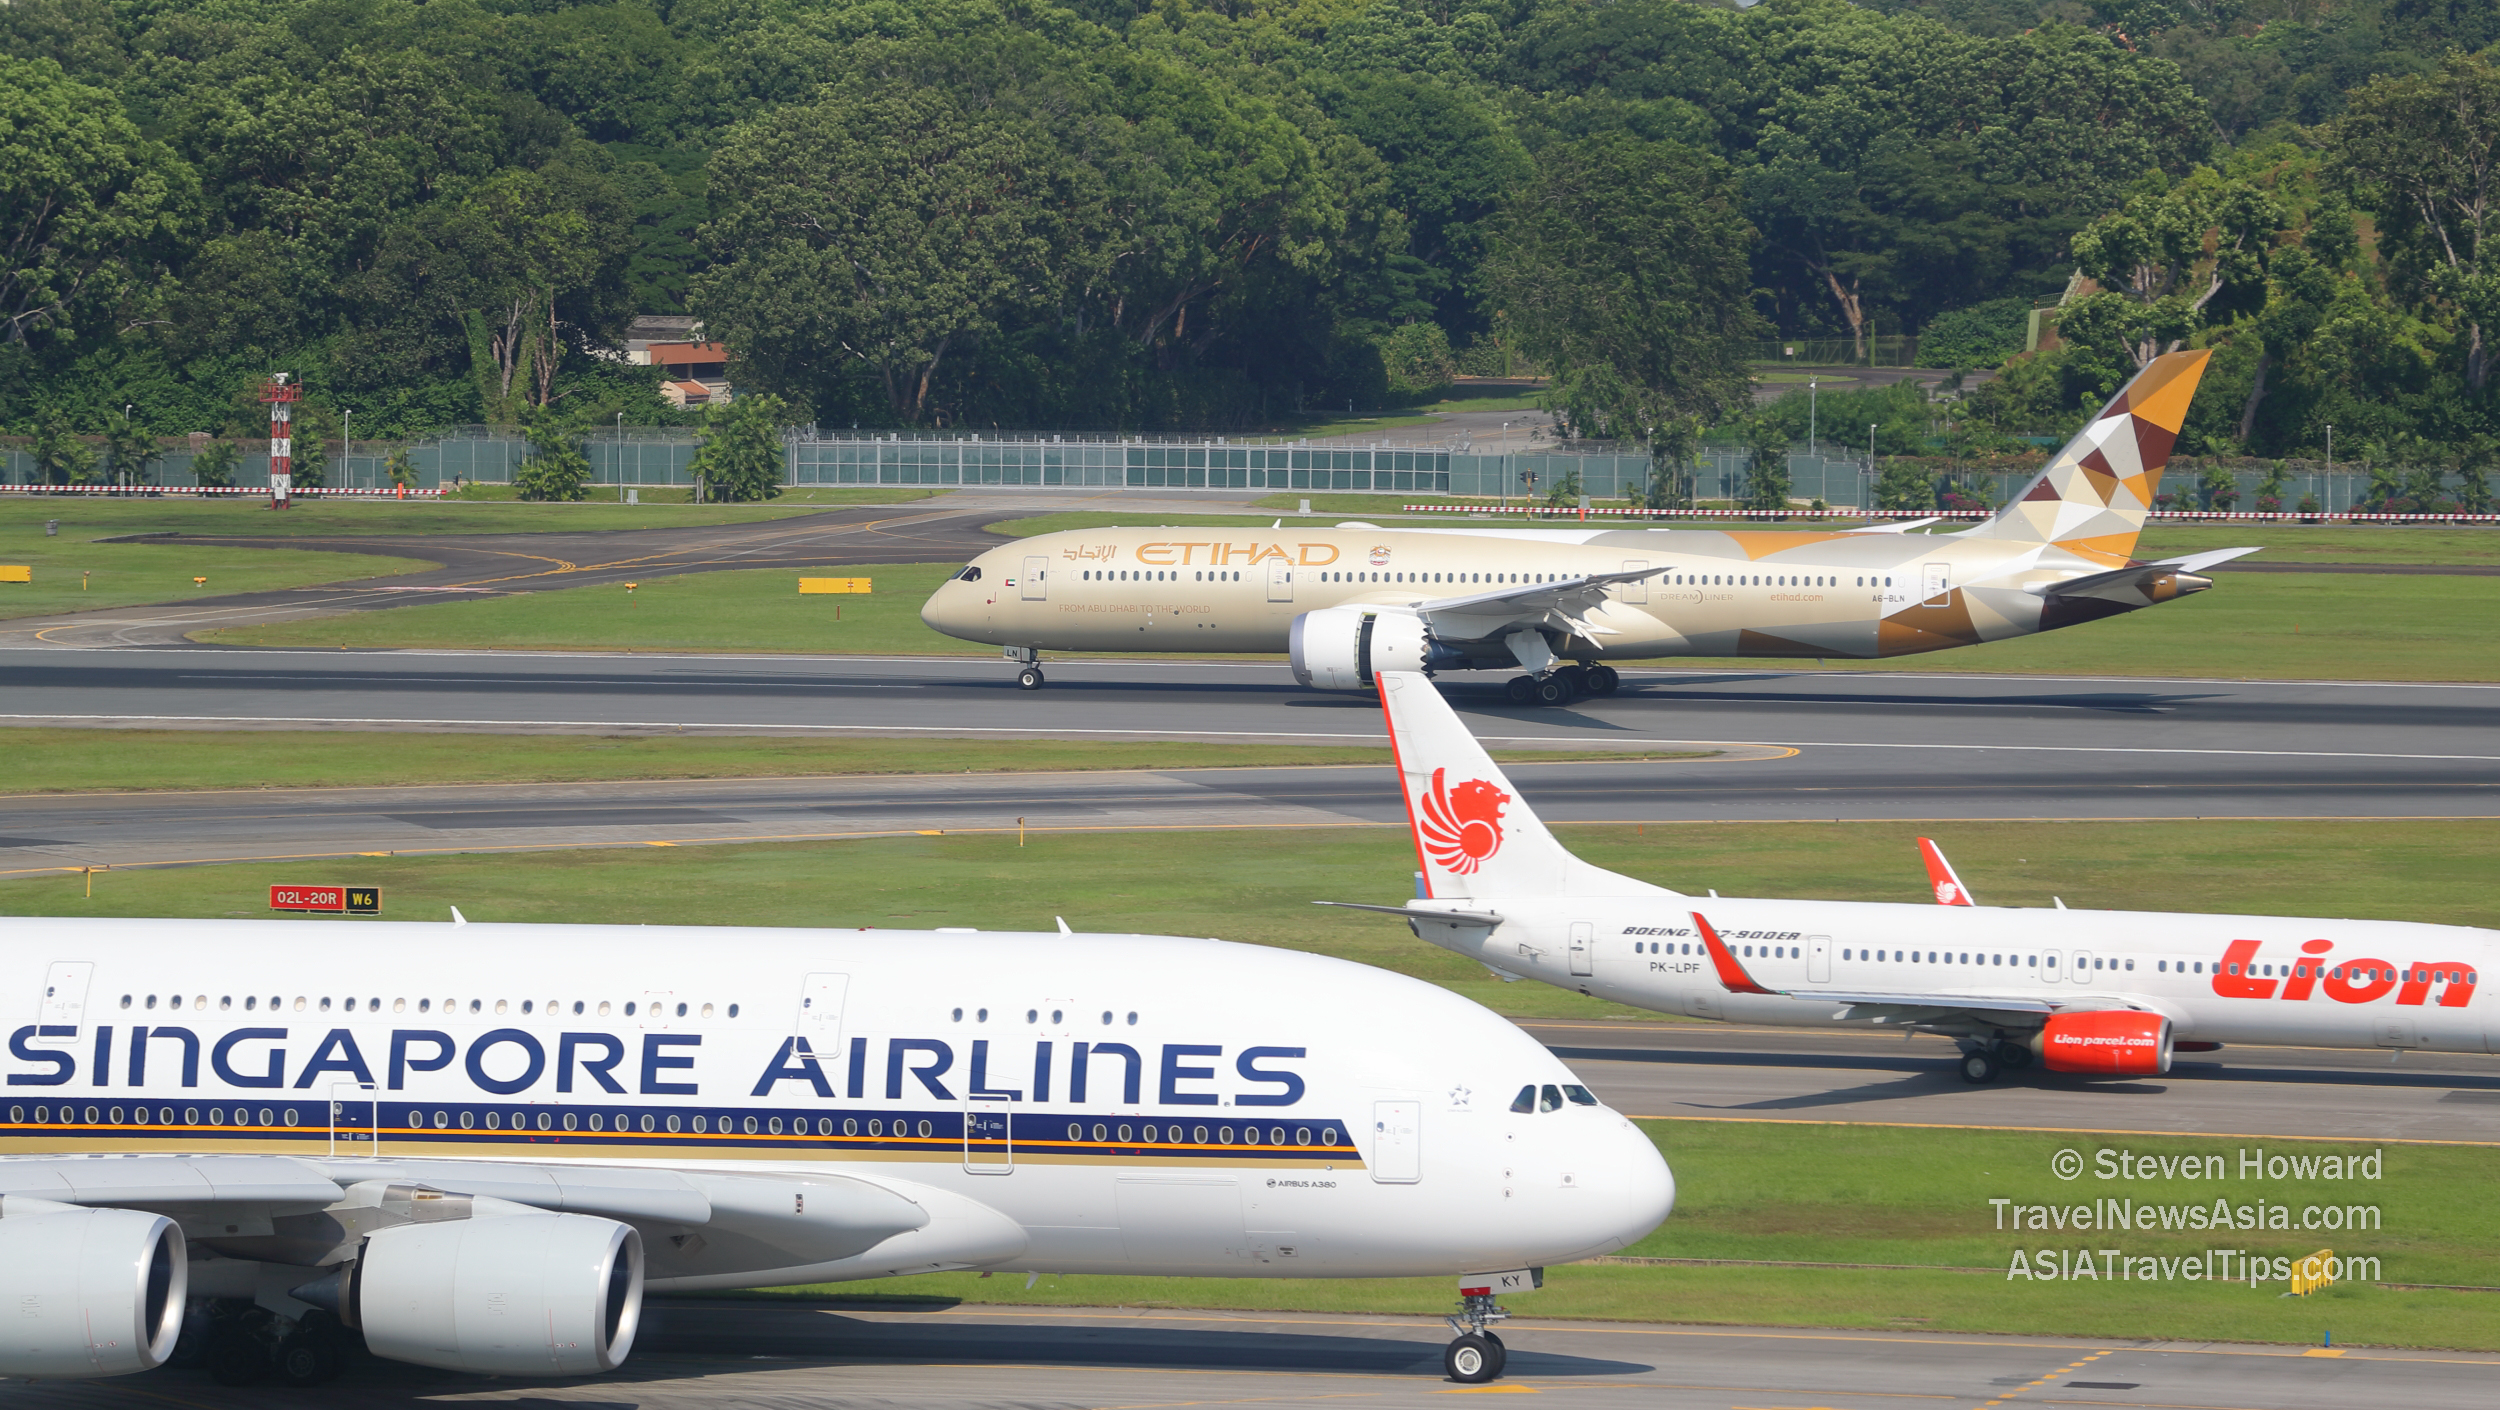 Singapore Airlines Airbus A380, Lion Air Boeing 737-900 and Etihad Airways Boeing 787-9 Dreamliner at Changi Airport in Singapore. Picture by Steven Howard of TravelNewsAsia.com Click to enlarge.